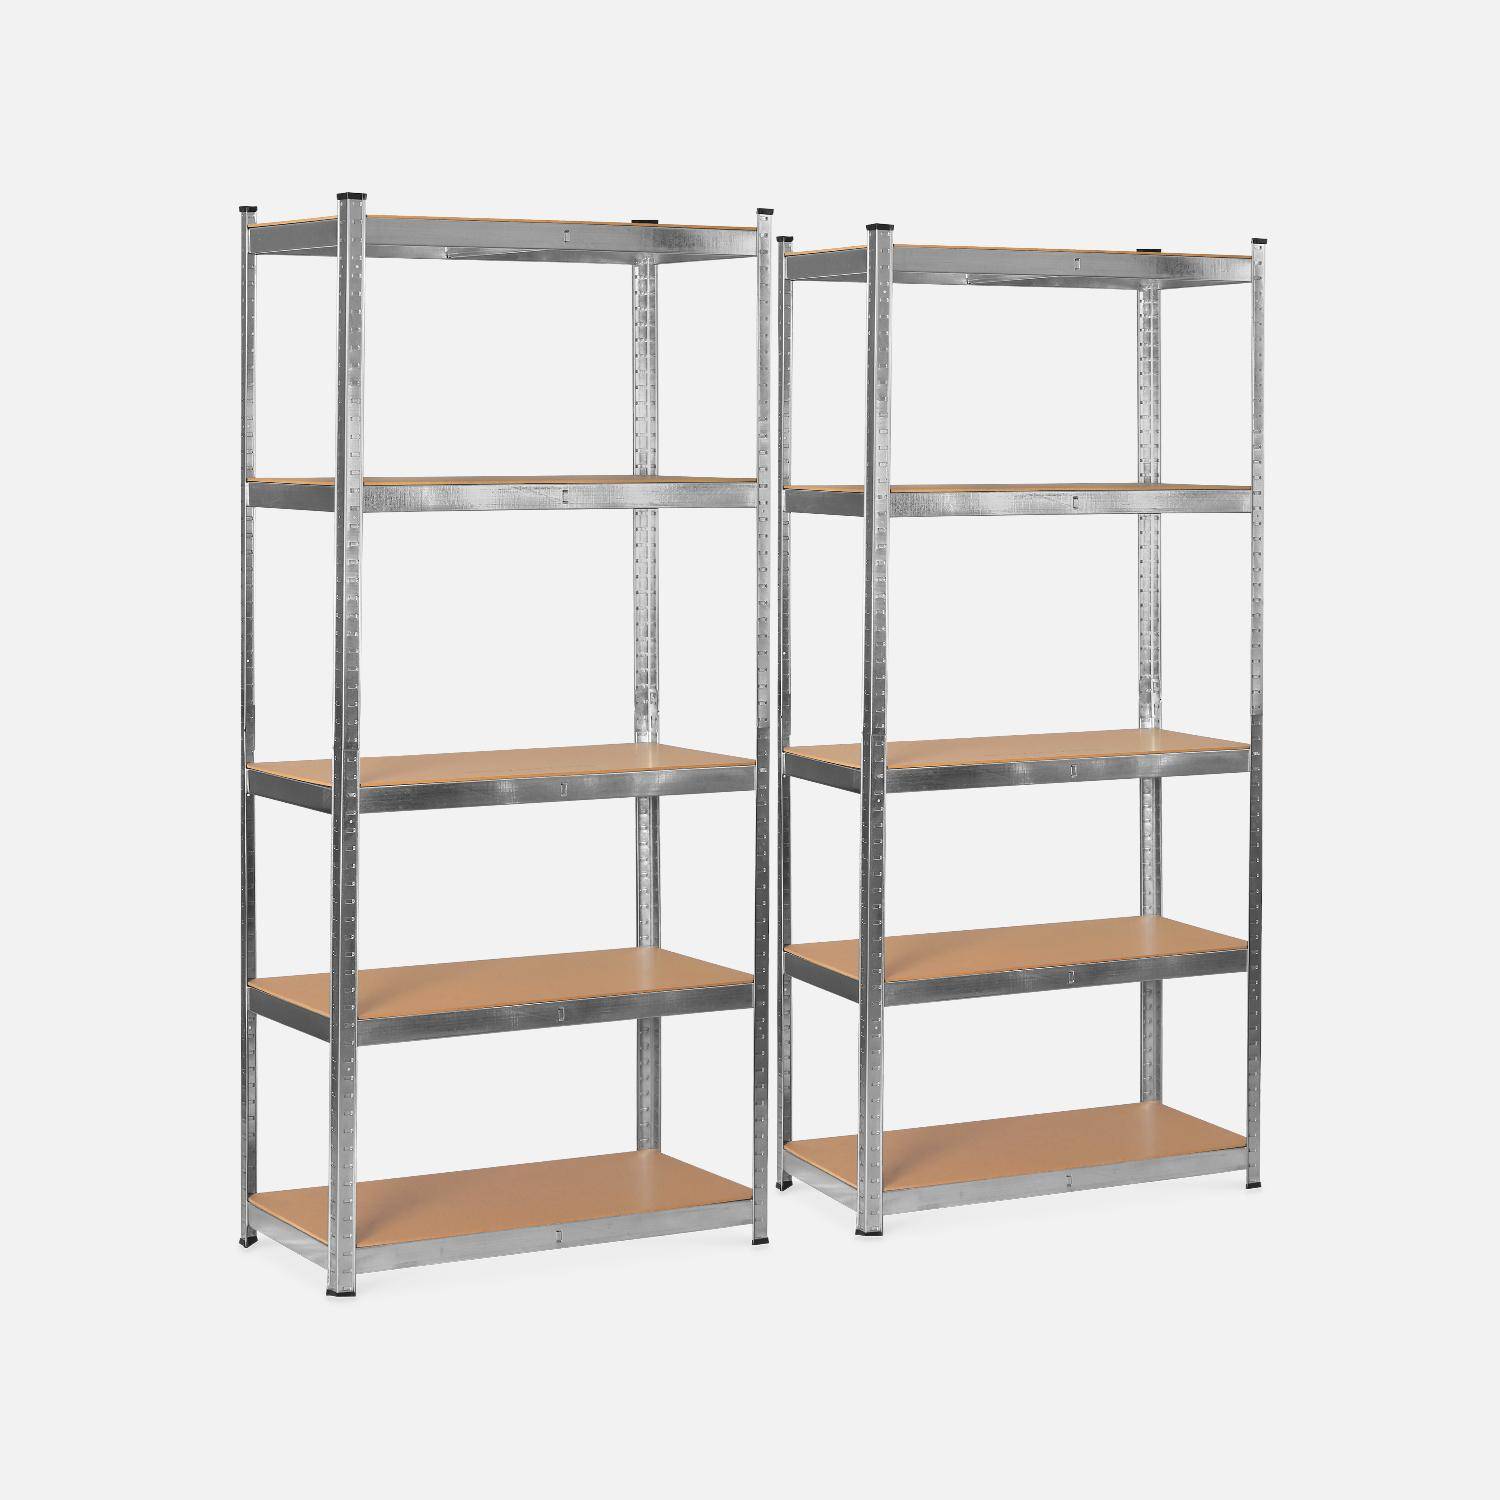 Set of 2 modular metal shelves for heavy loads - Modul - with 5 trays,sweeek,Photo1